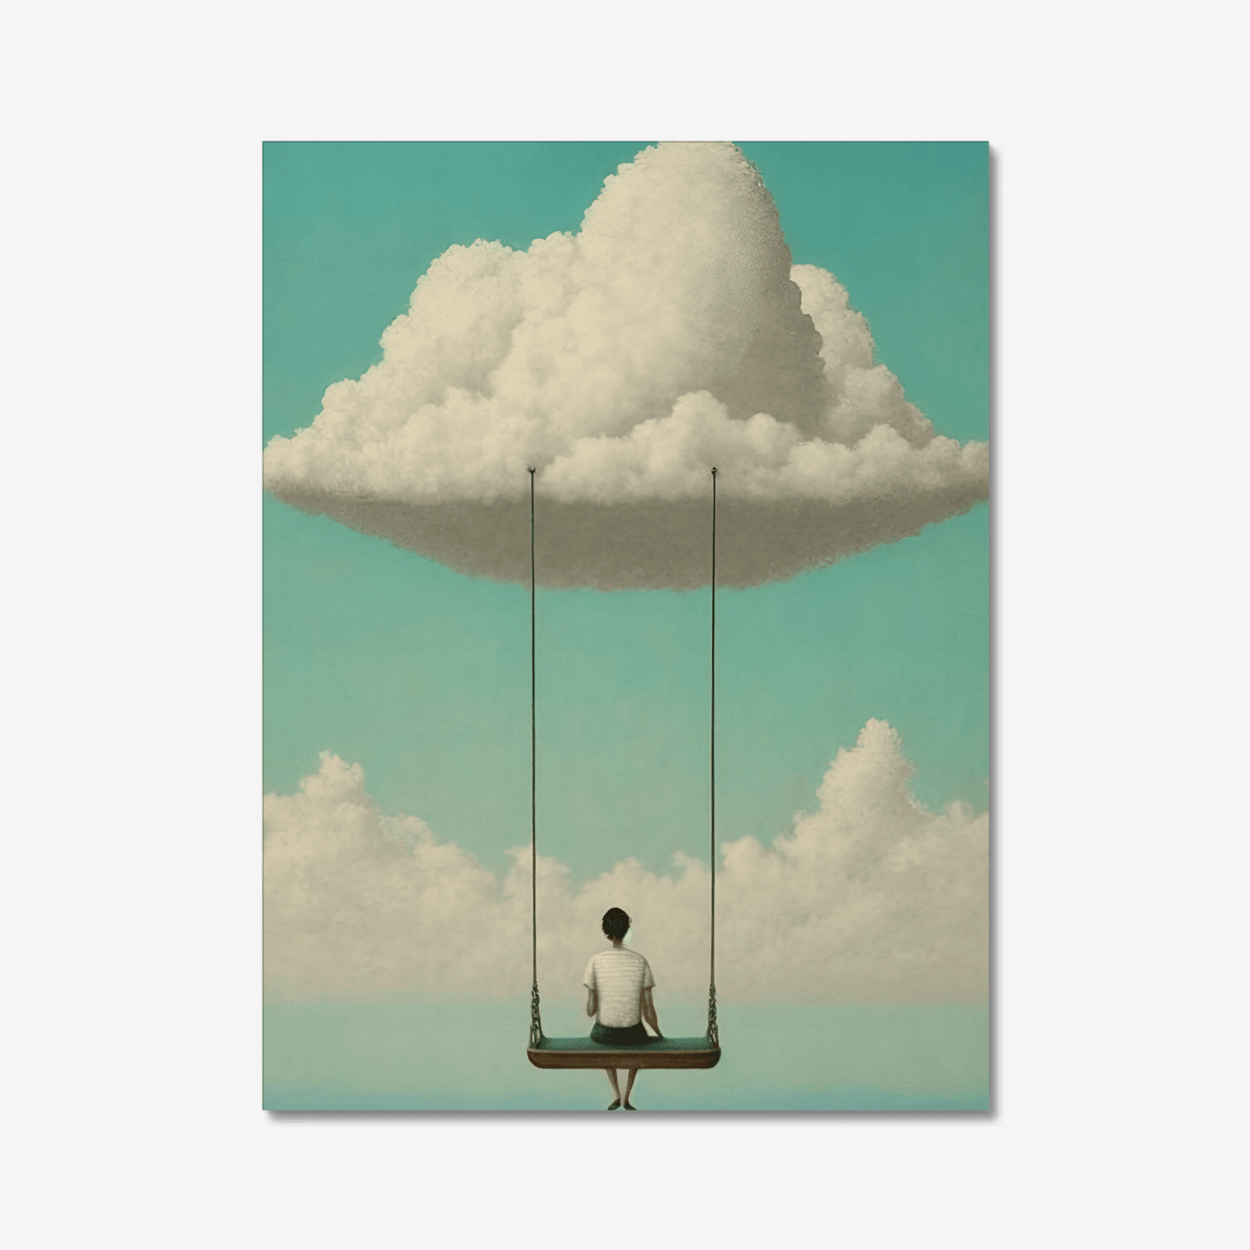 Hanging from the clouds